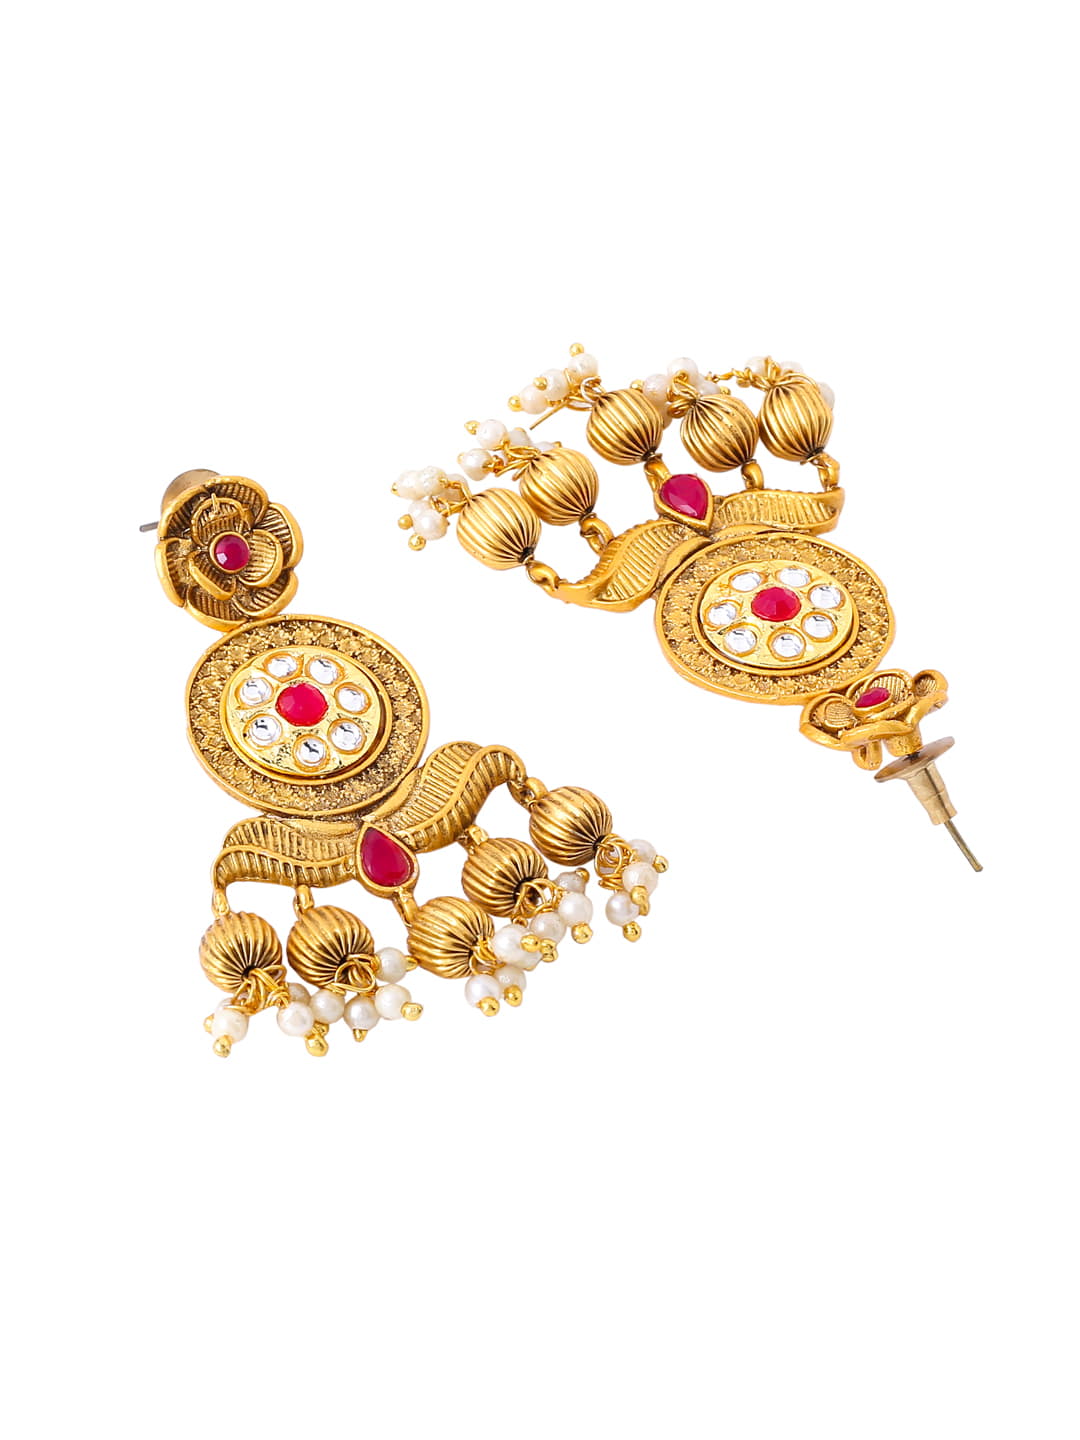 Gold Plated Peacock Shape Long Necklace Set-Viraasi